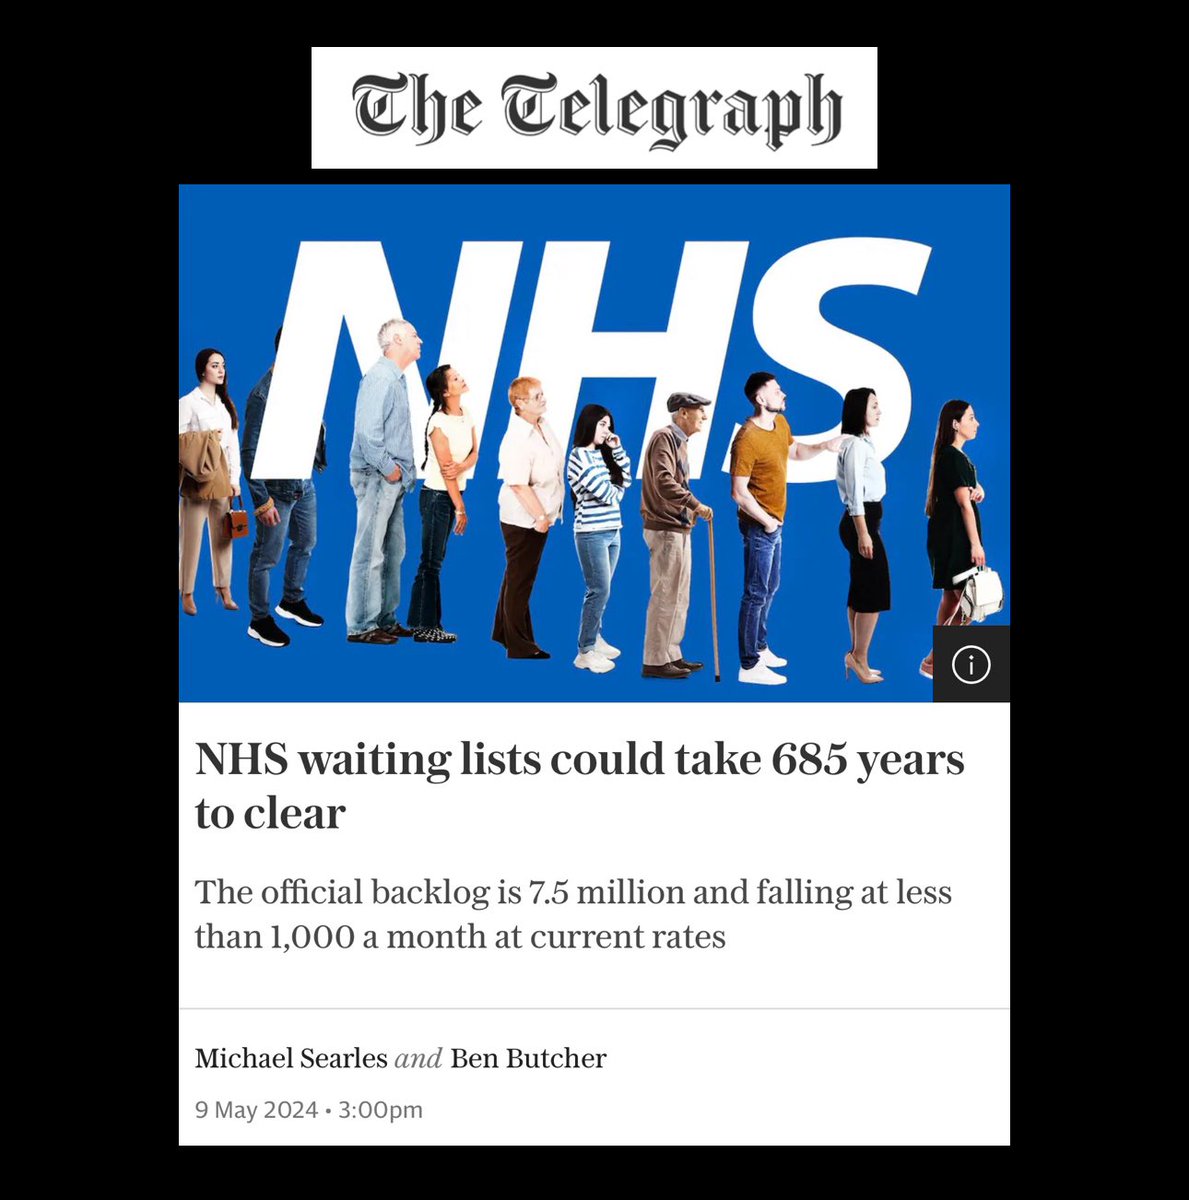 Dear 🇬🇧,

Not a strike in sight, just a militant govt holding you hostage on the longest waiting list in NHS history, forcing you to suffer until in desperation, you empty your life savings into their private healthcare market. Your family isn’t safe in Tory Britain.

#SOSNHS